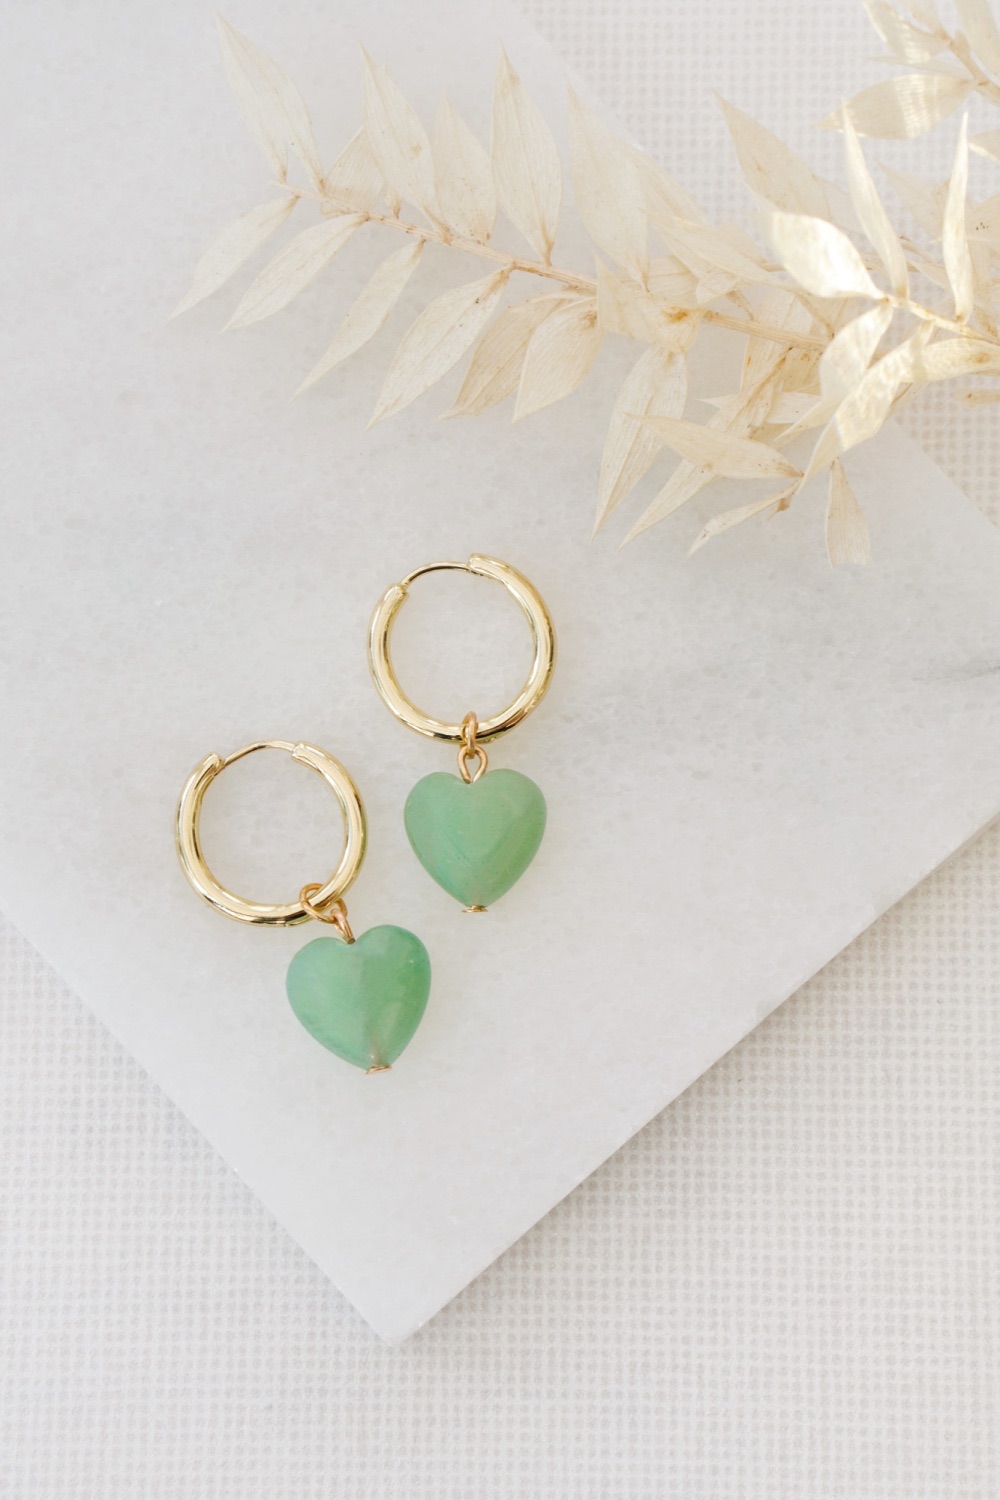 Gold Tone Chunky Hoop and Aventurine Heart Earrings by Xander Kostroma